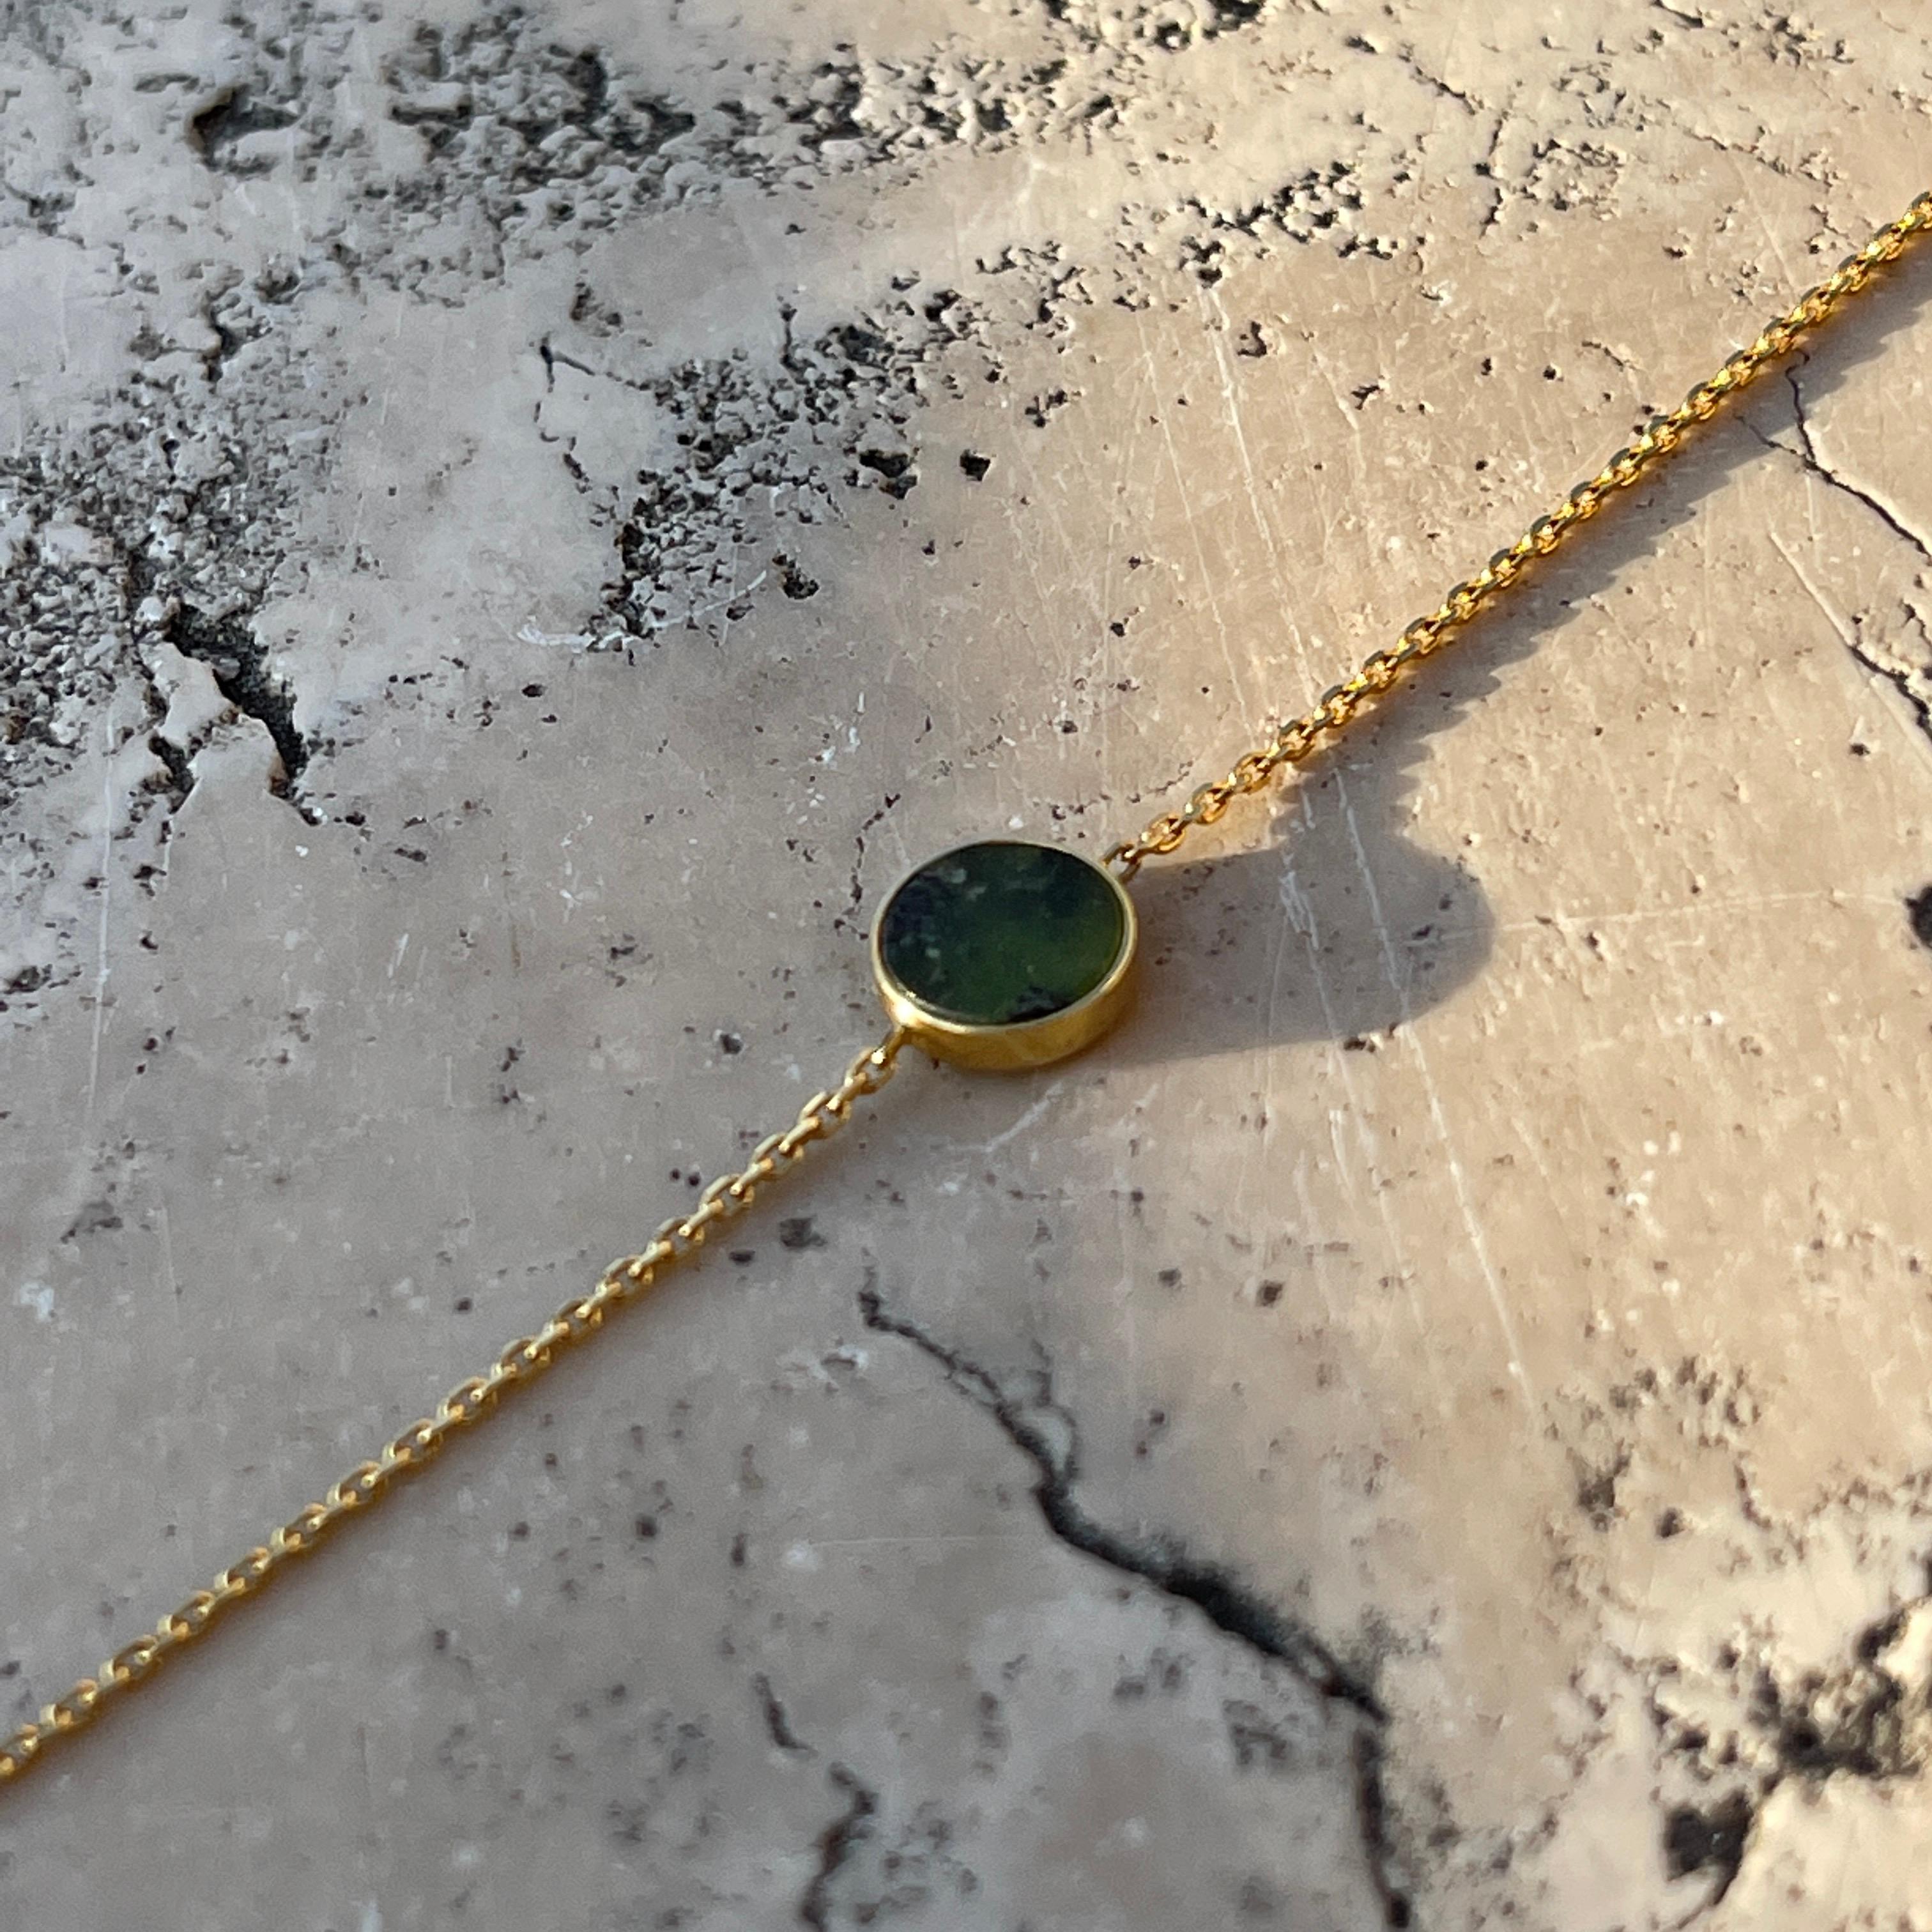 This bracelet with a dark green stone on a delicate gold chain will be a beautiful adornment for your wrist. Its minimalist design means you can wear it with practically any outfit. It will be perfect for both elegant outings and meetings with